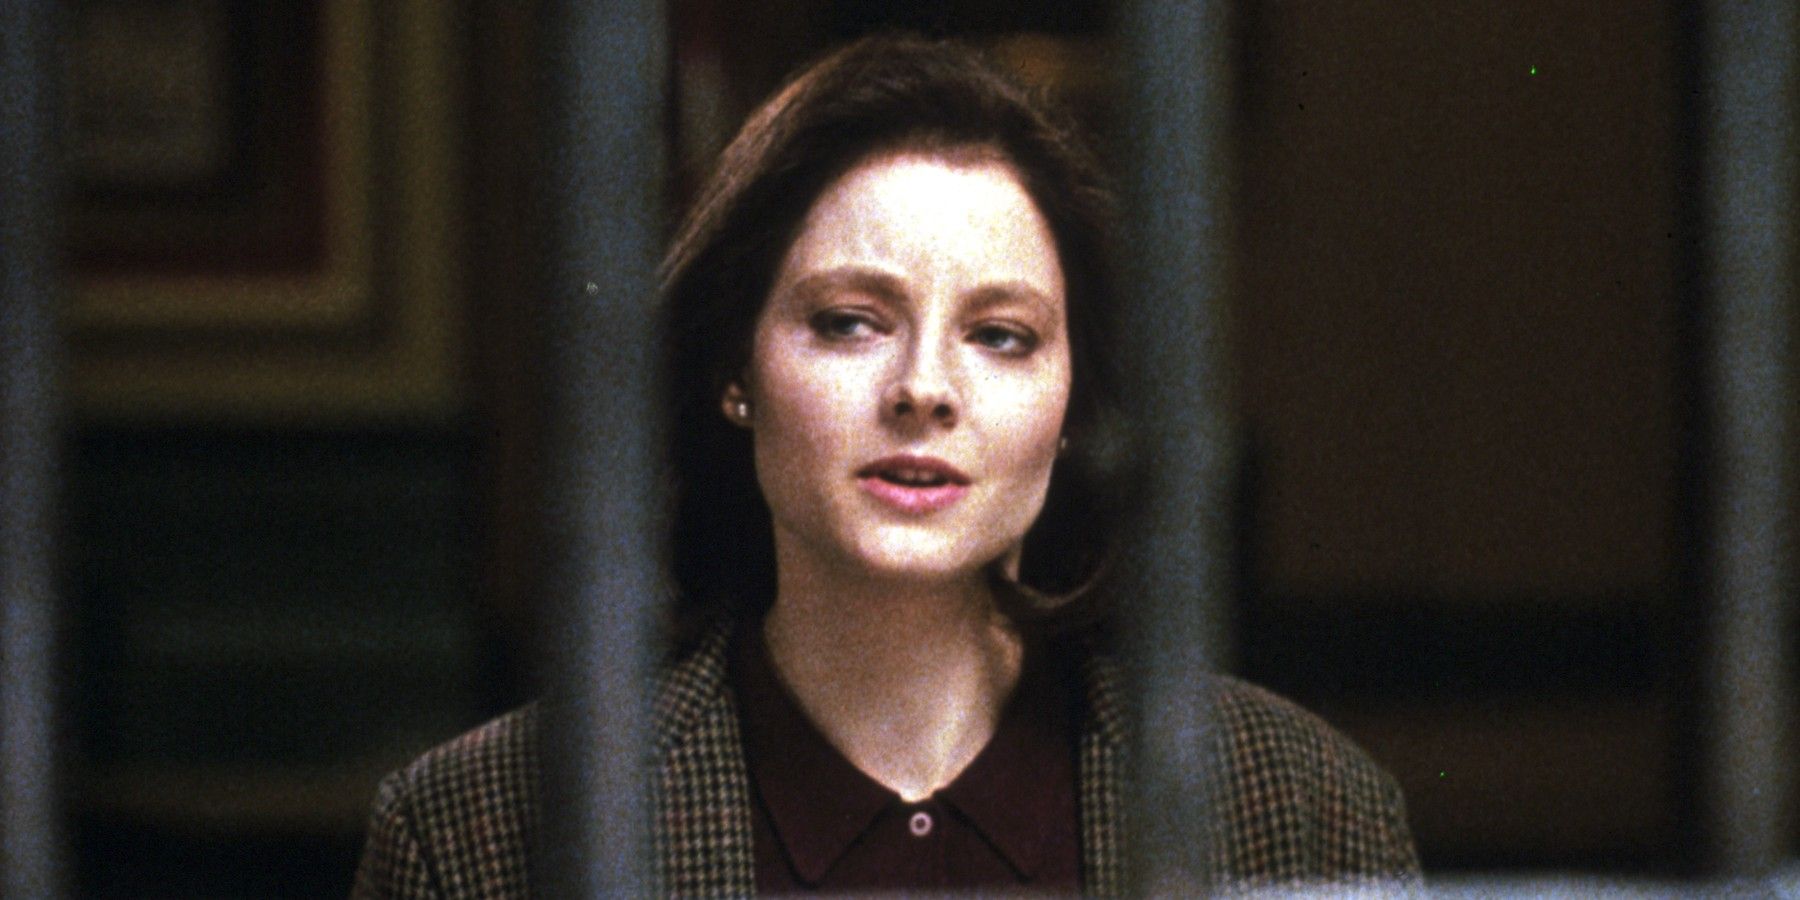 Agent Clarice Starling peaks to the serial killer Hannibal in The Silence of the Lambs